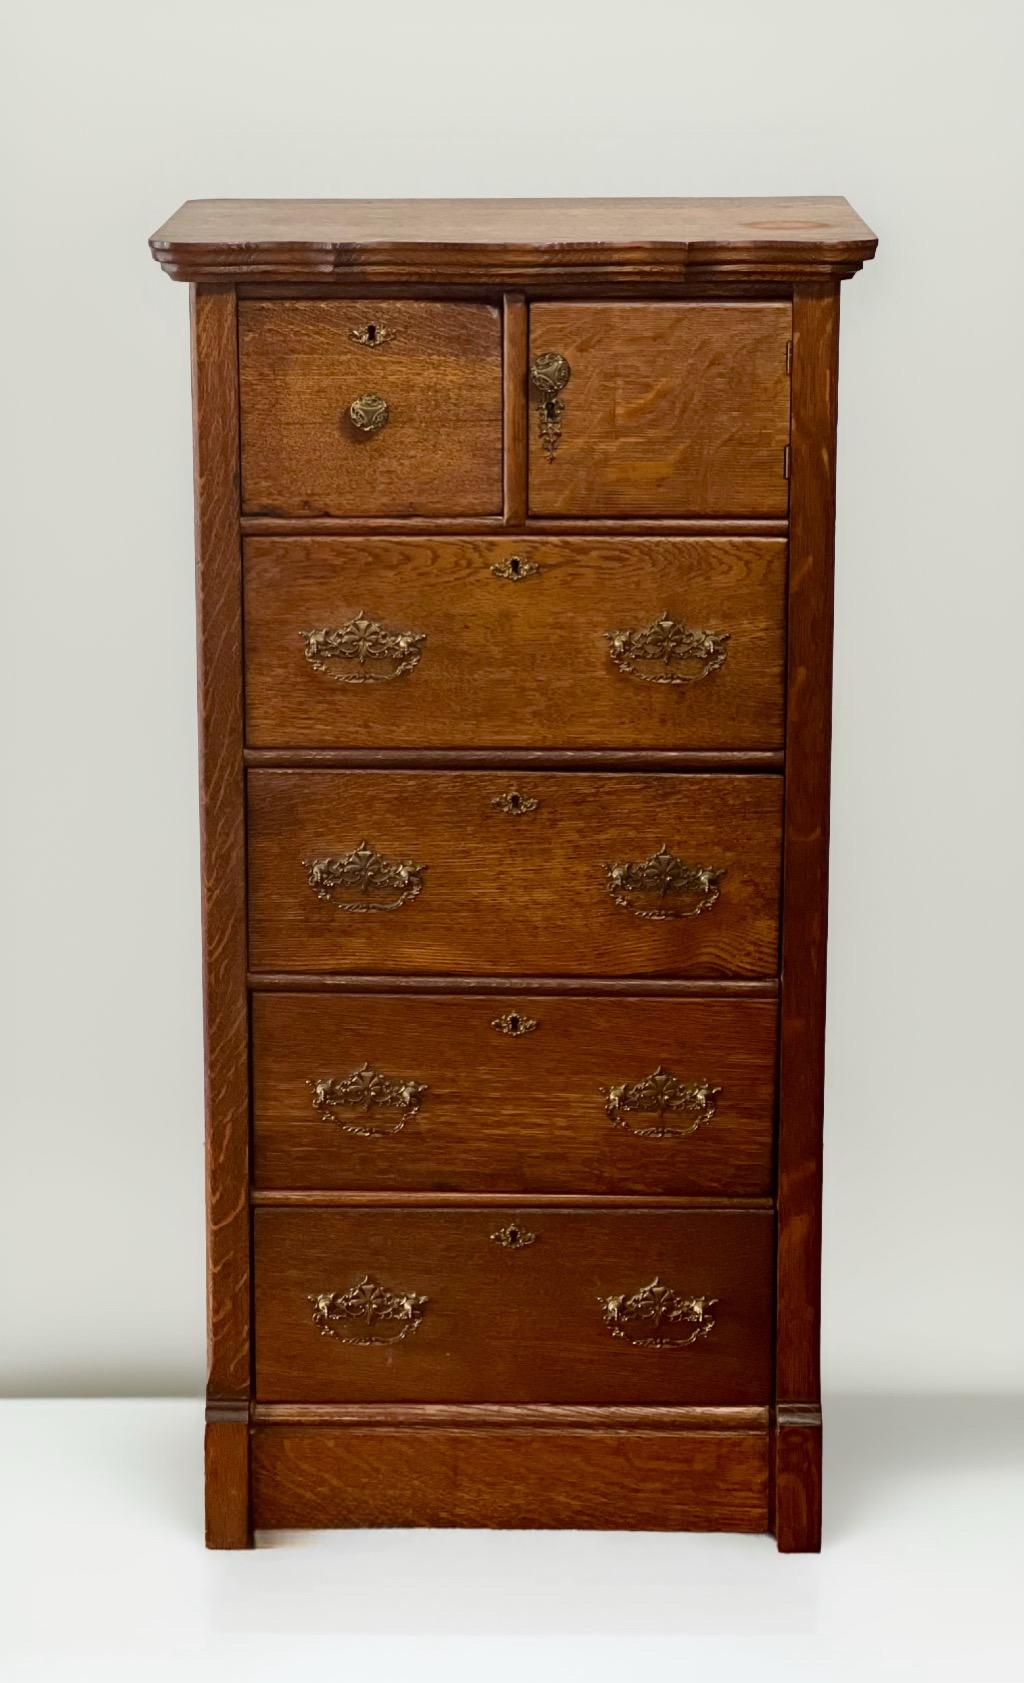 English quarter sawn oak lingerie chest, c. 1900.

Rare all handcrafted bonnet lingerie chest of warm toned oak with original brass hardware. It has hand dovetailed drawers and solid construction with an immaculate interior. Chest features a doored